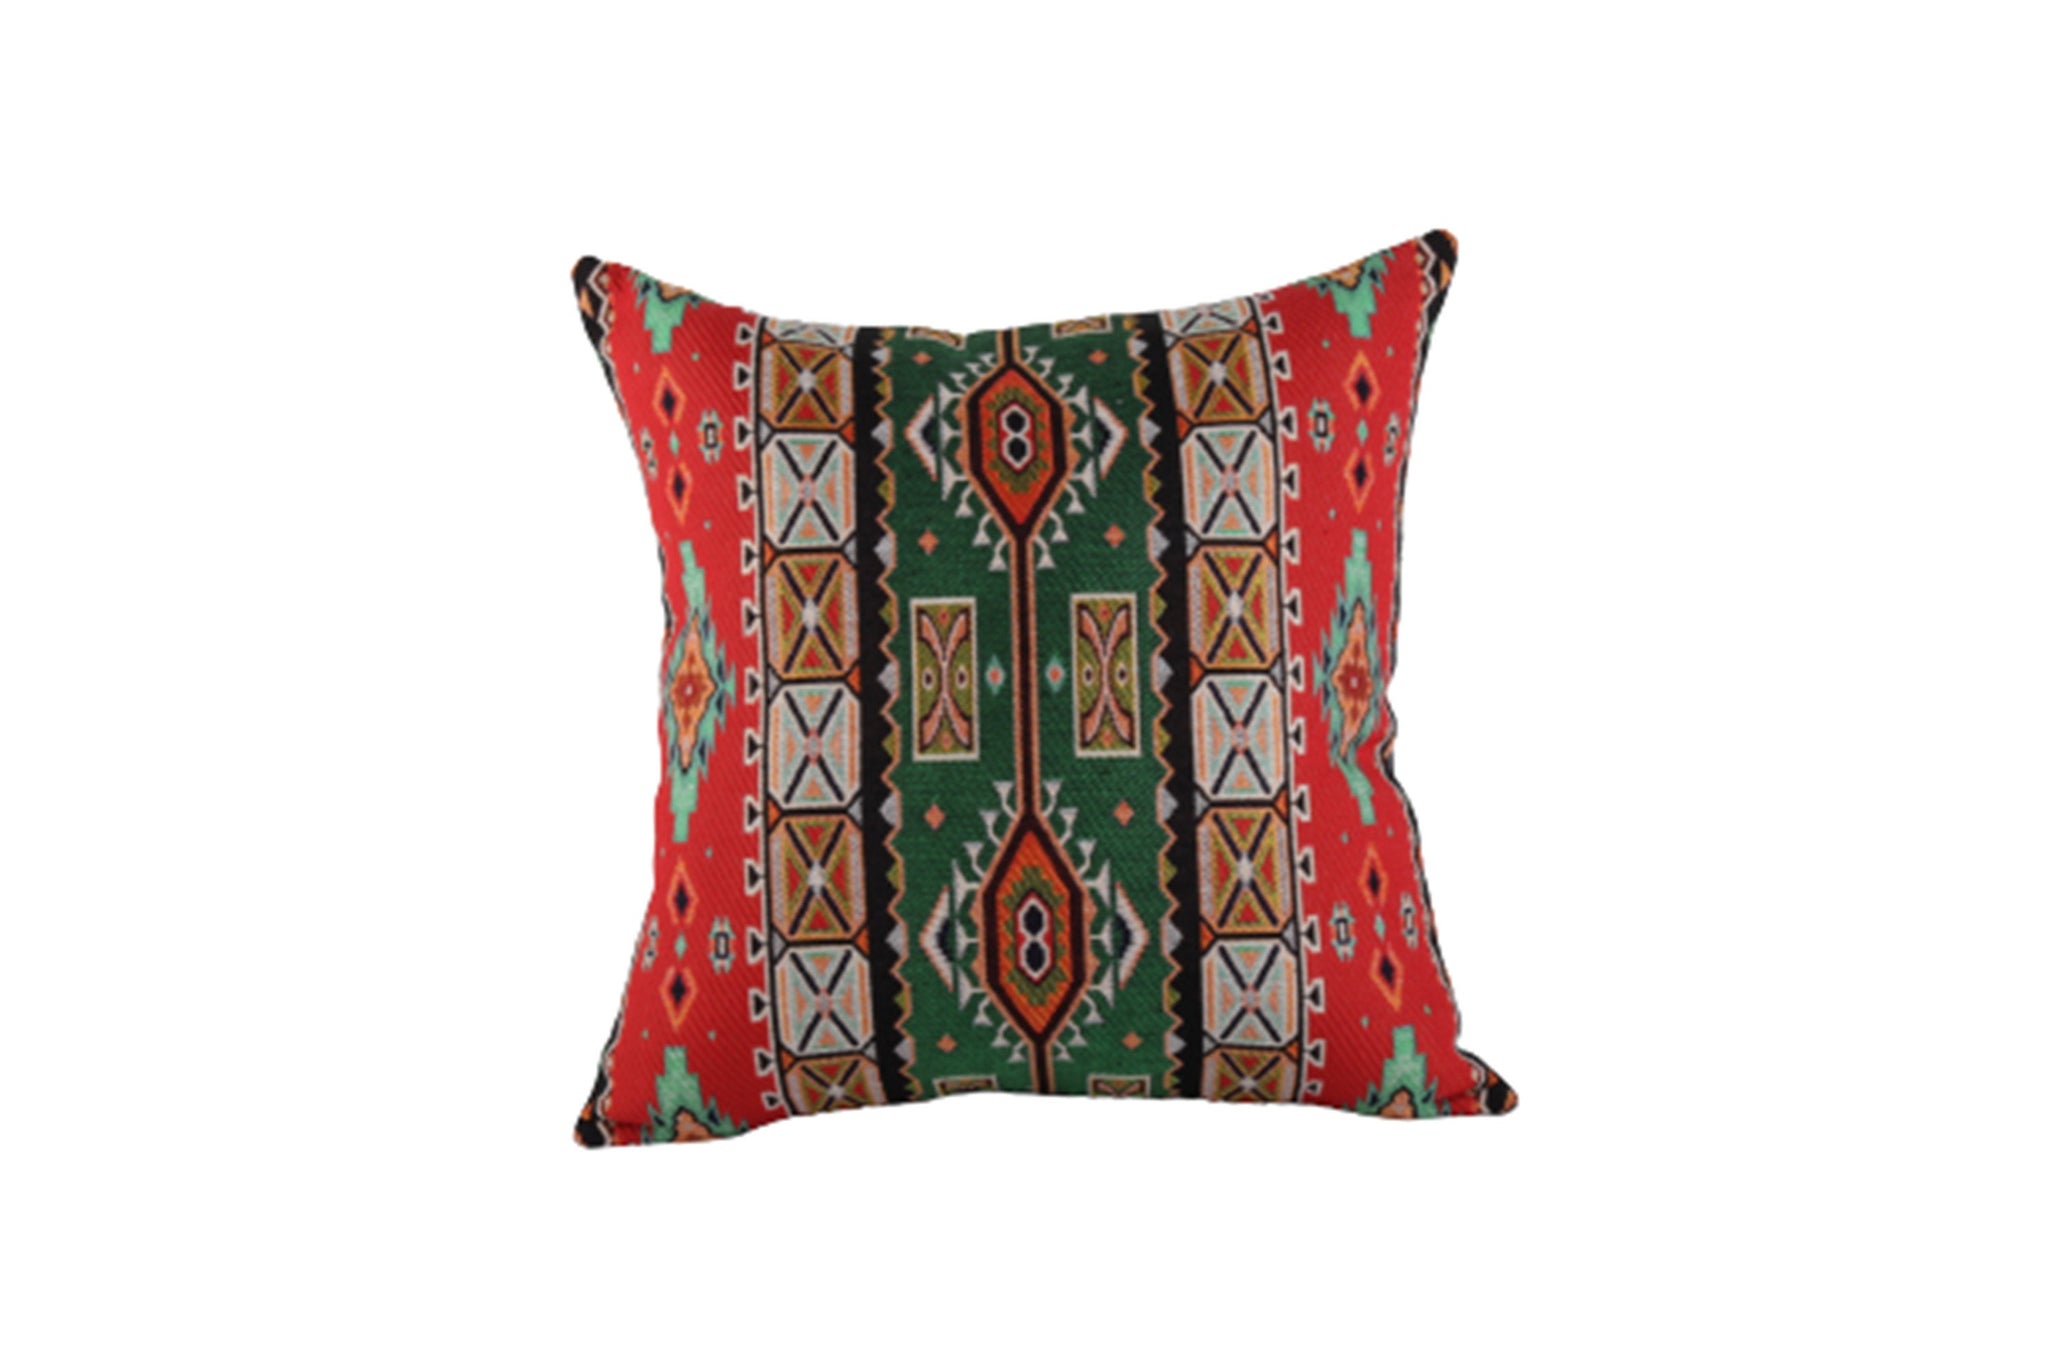 Ethnic Turkish Throw Pillow Cover | Kilim Pillow | Woven Pillow Cover | Boho Pillow Case | Decorative Pillows | Cushion Cover| Home Gift 003